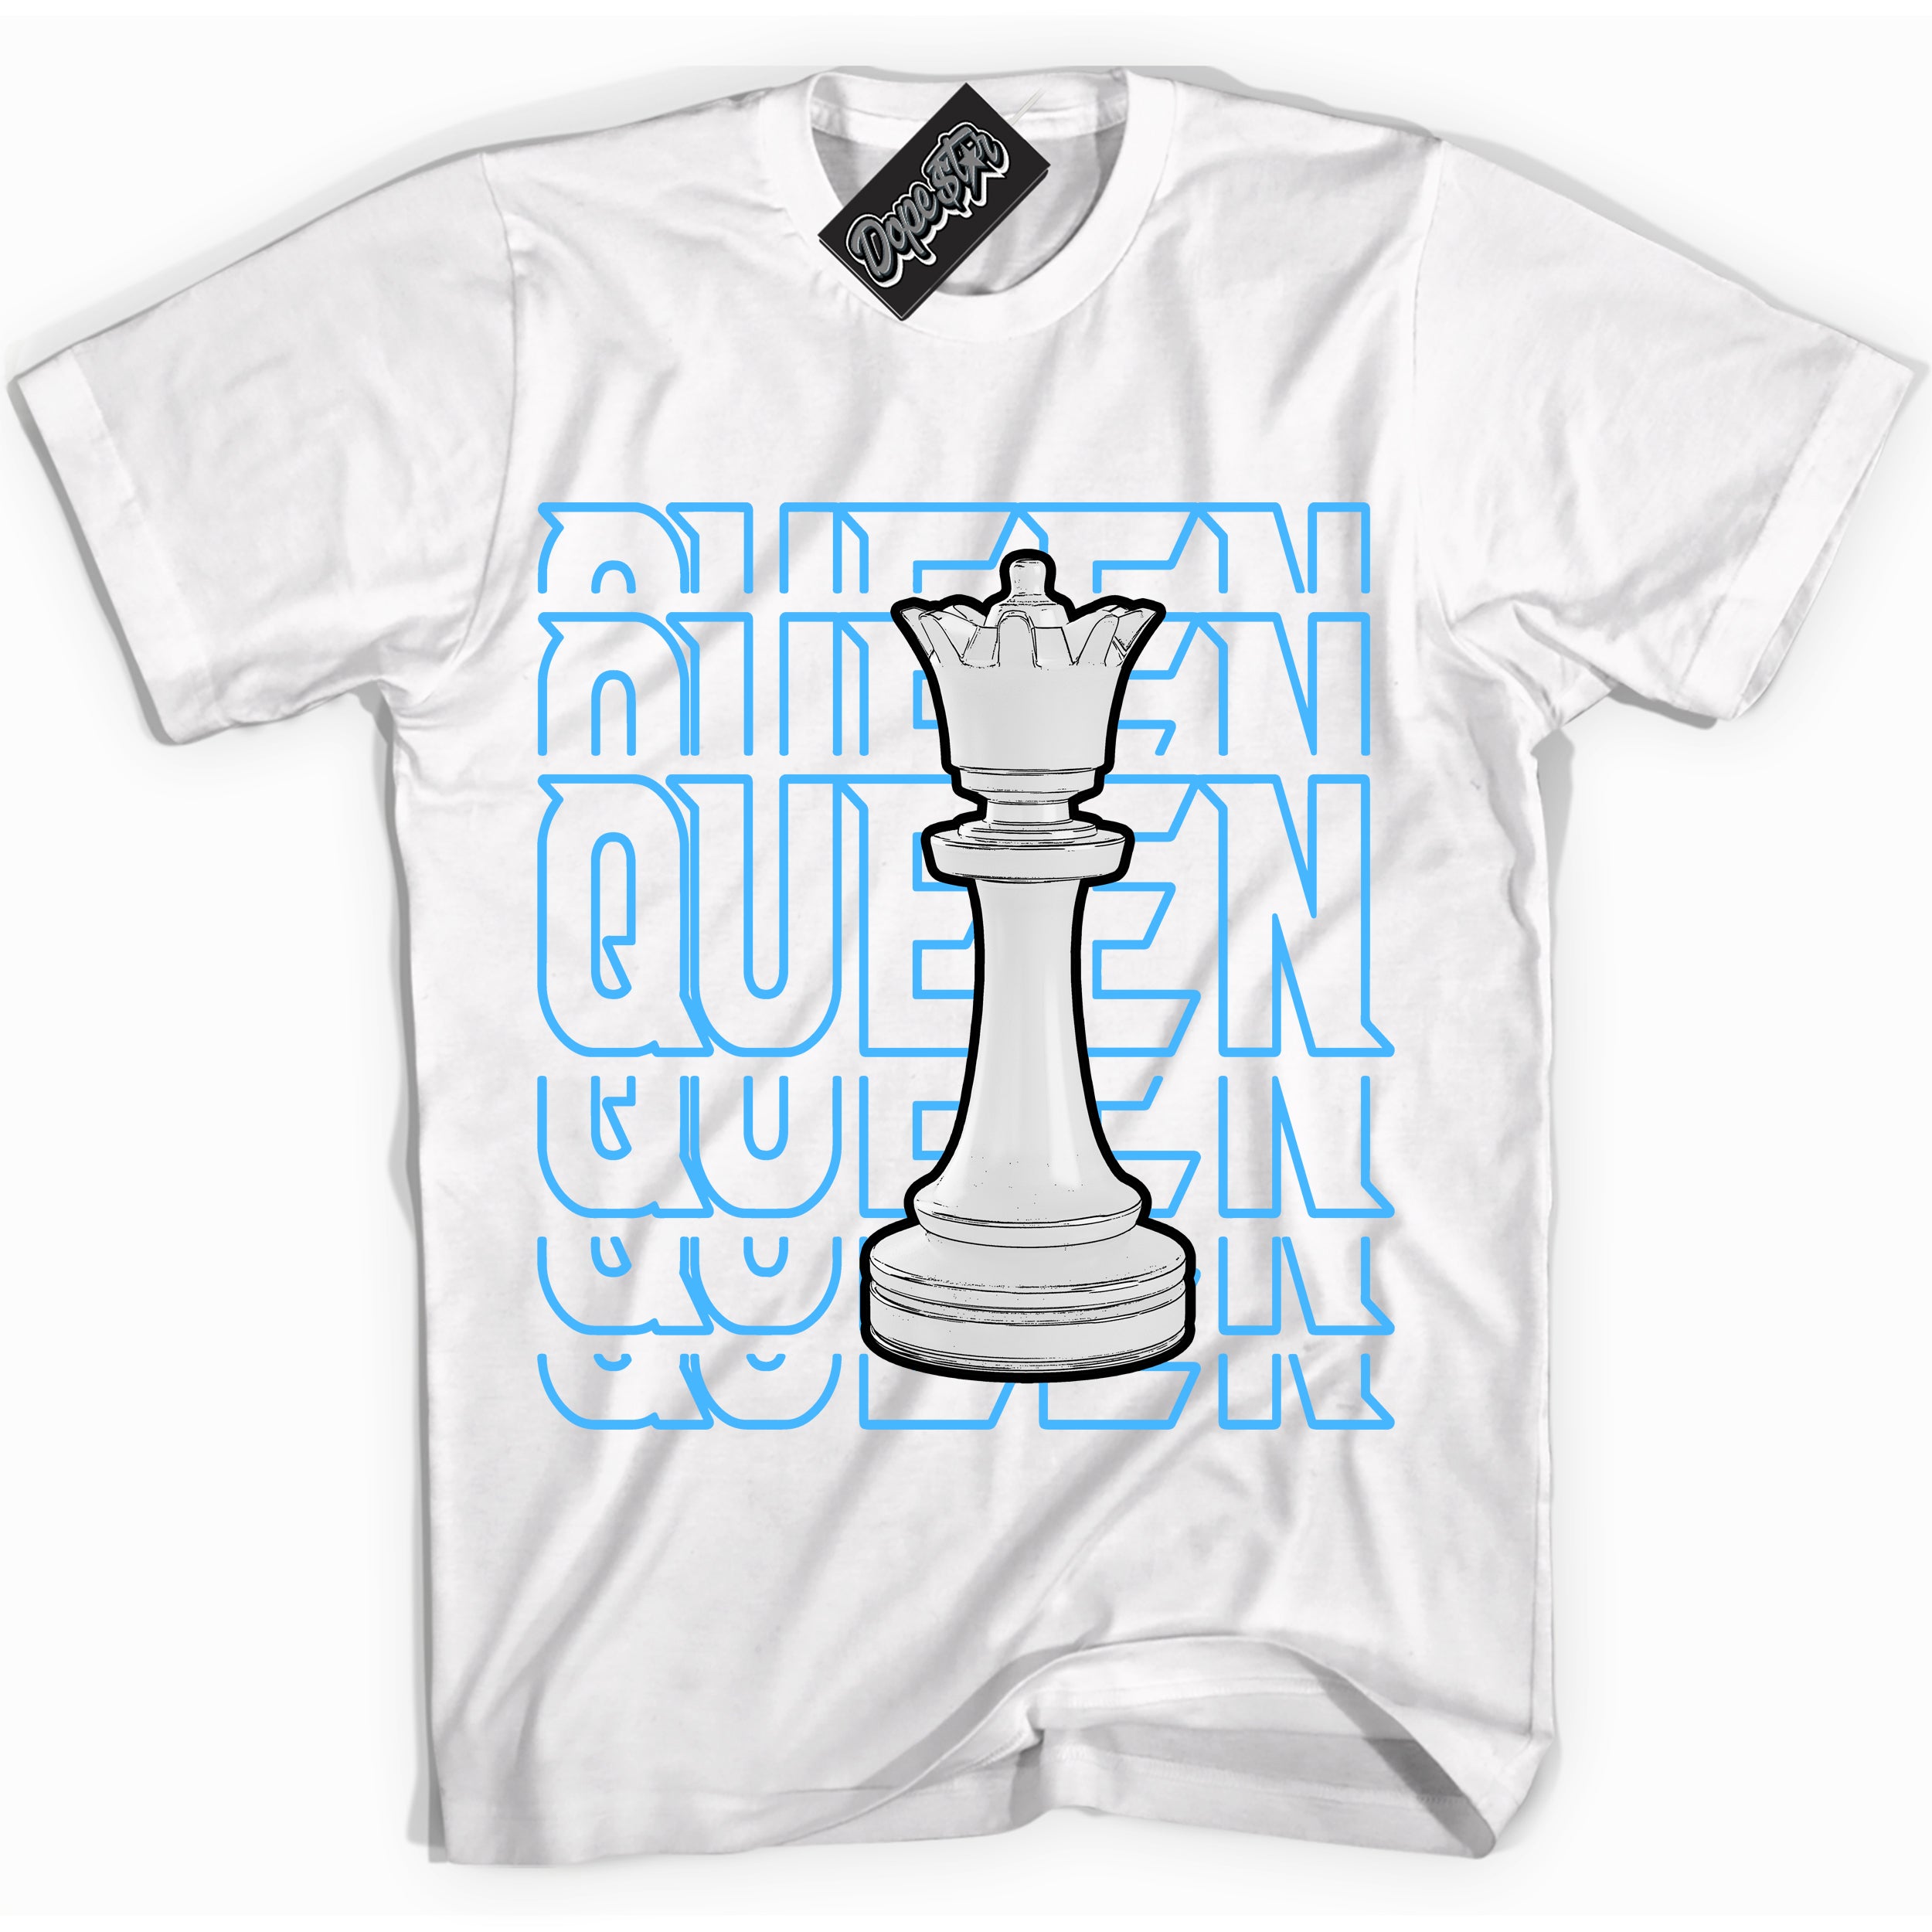 Cool White graphic tee with “ Queen Chess ” design, that perfectly matches Powder Blue 9s sneakers 